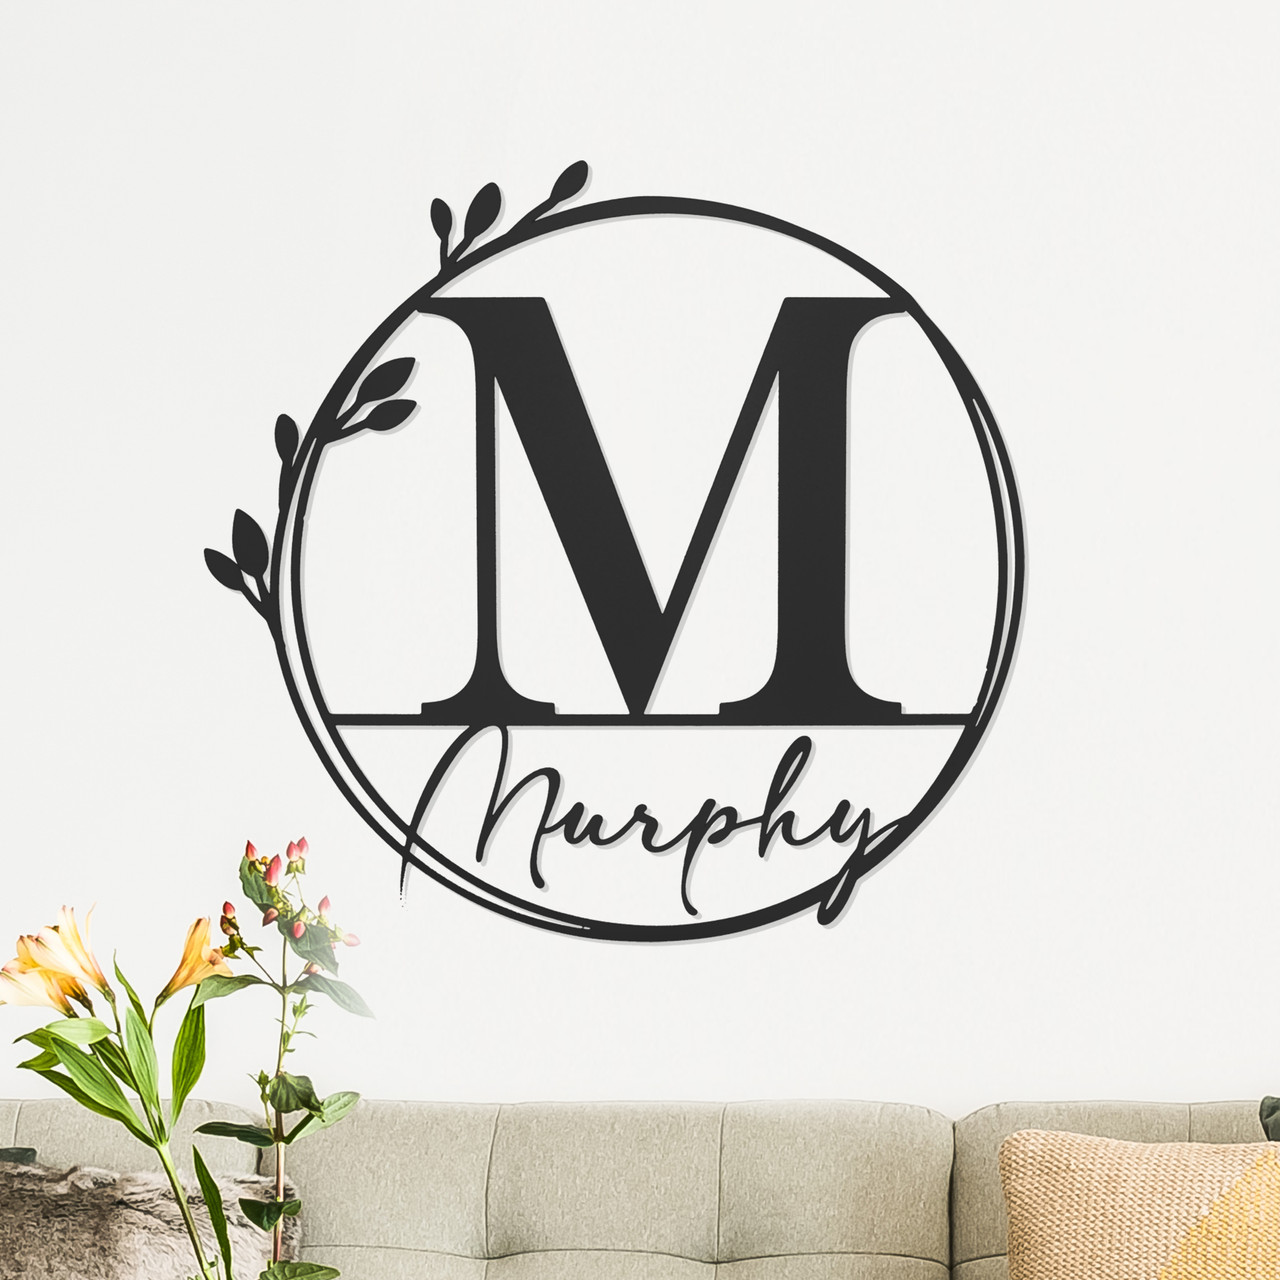 Personalized Metal Floral Leaves Outdoor Monogram Wreath product image